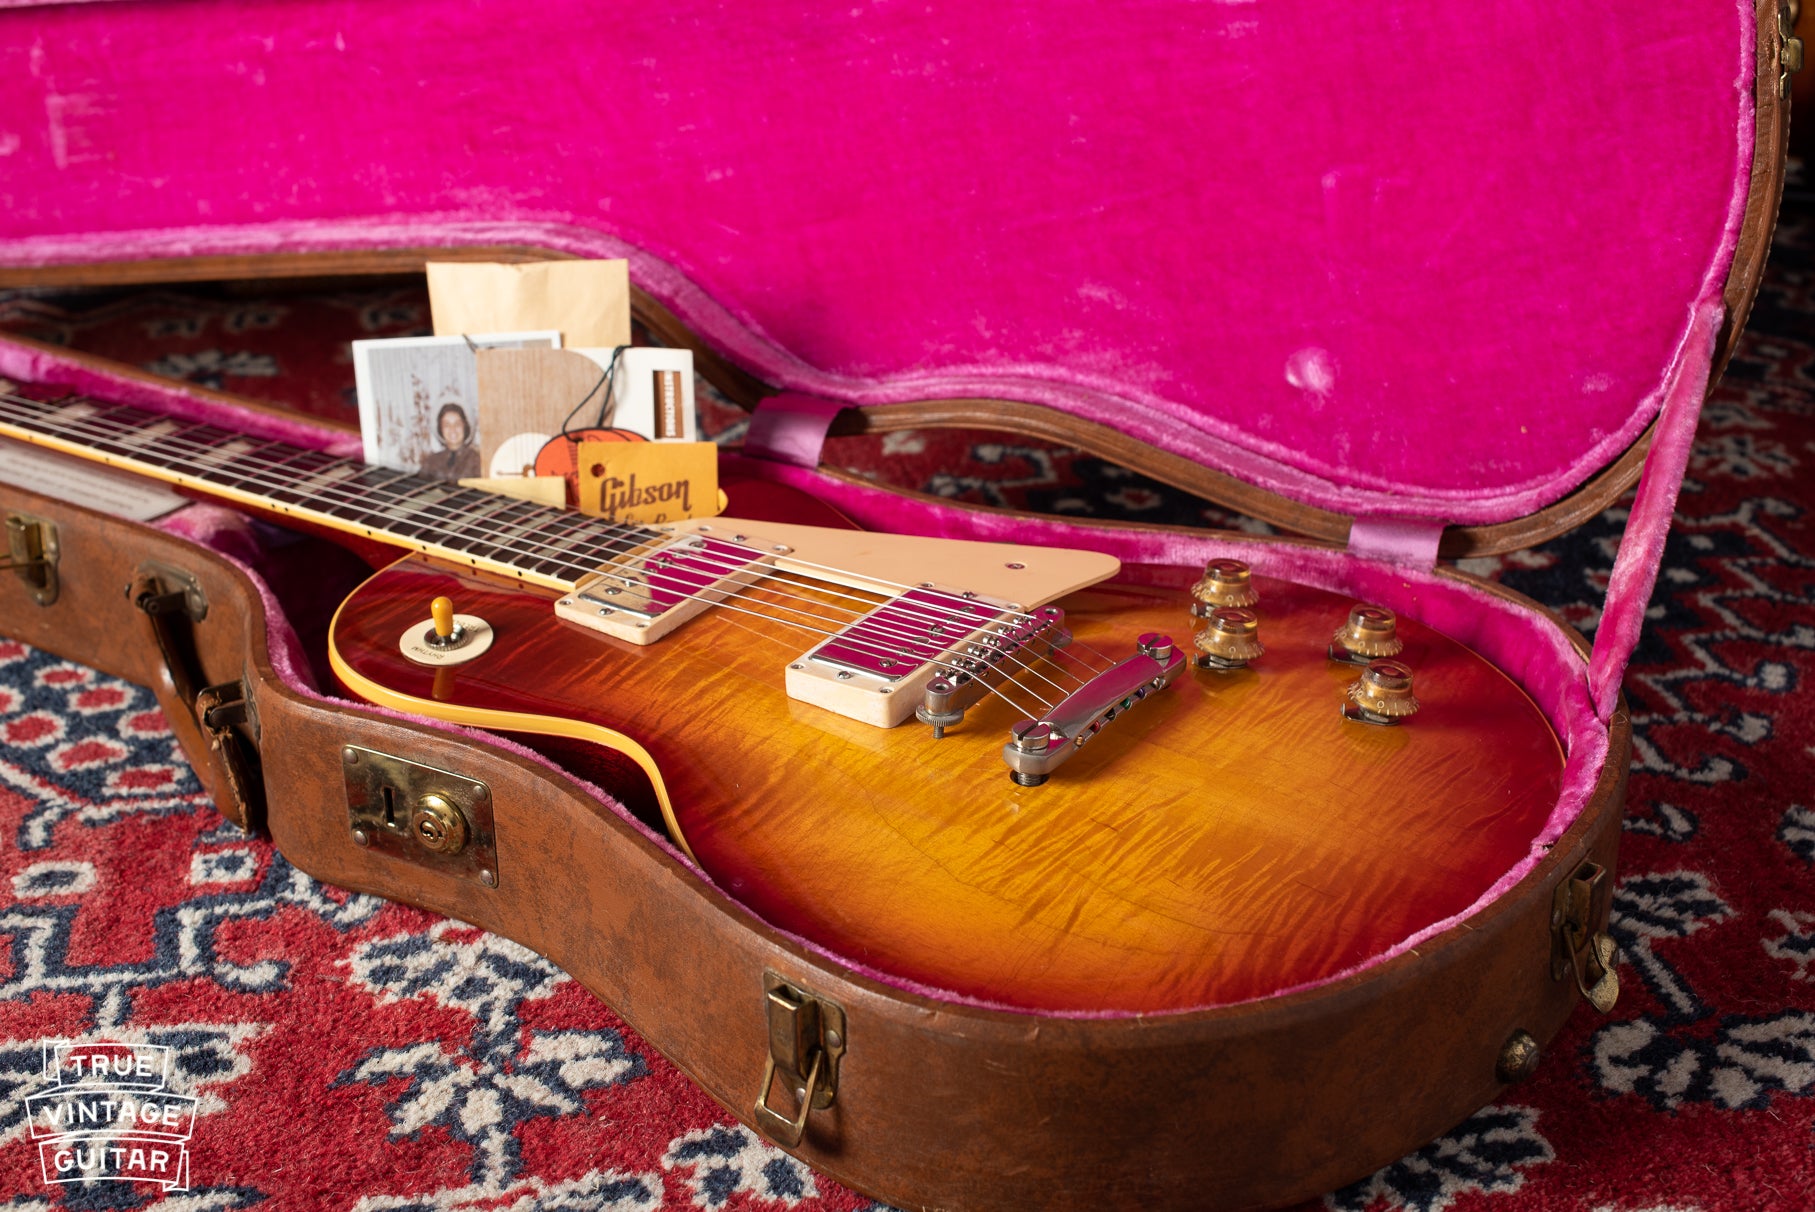 Gibson Les Paul collector and values for guitars made in the 1950s 1960s